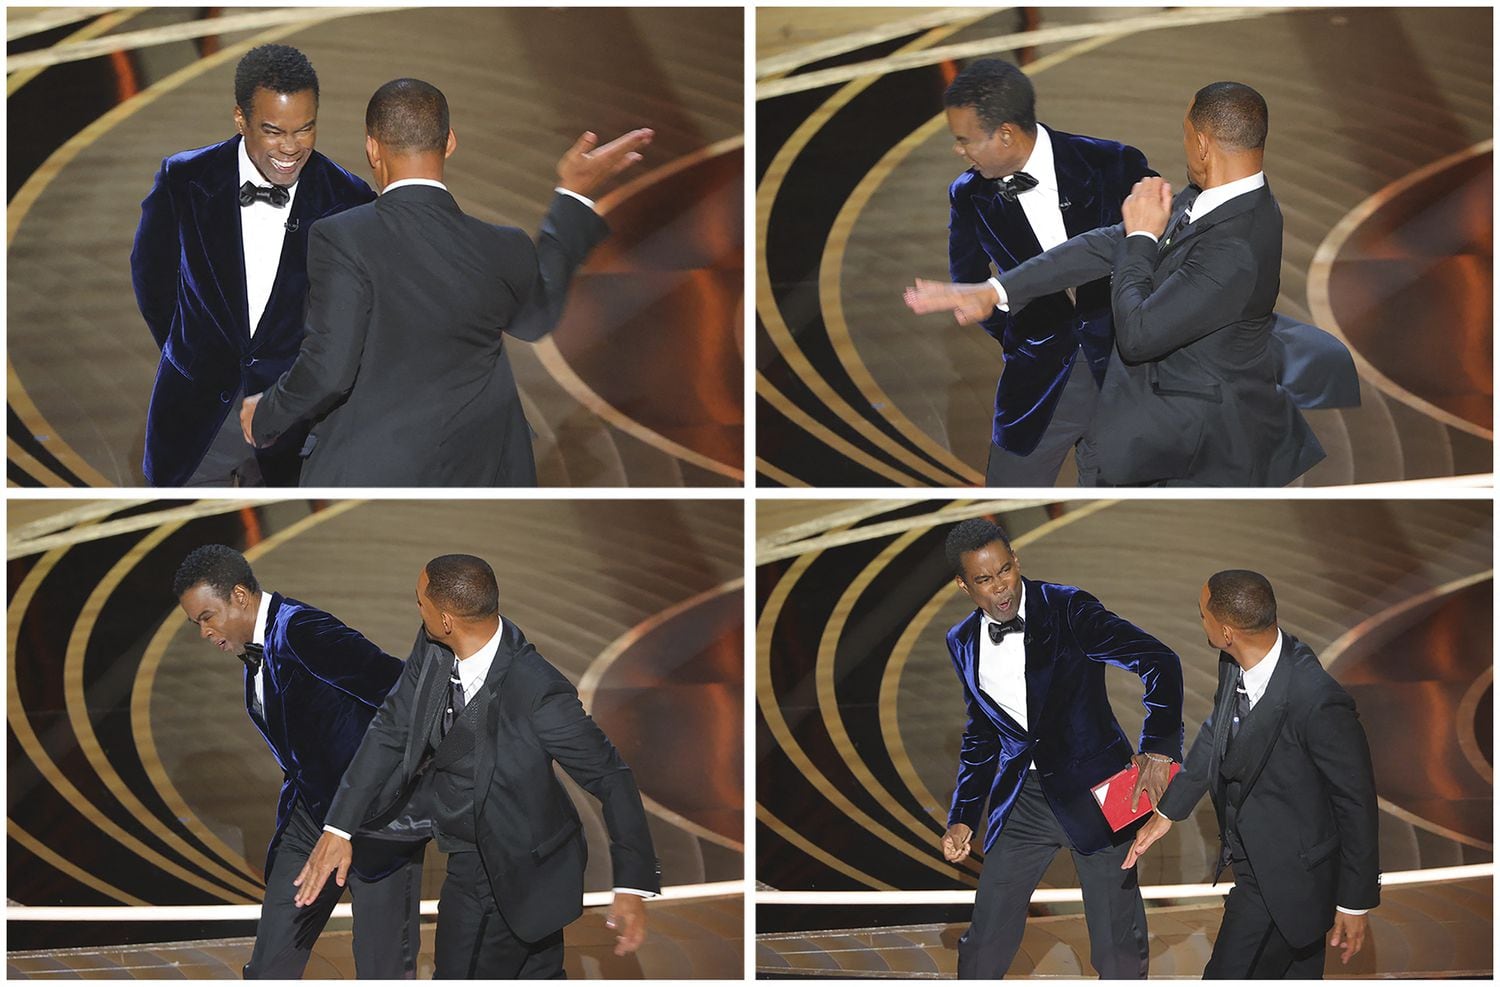 Will Smith hits Chris Rock in the most awkward moment of the Oscars 2022: "Stop talking about my wife" |  Oscar Awards 2022